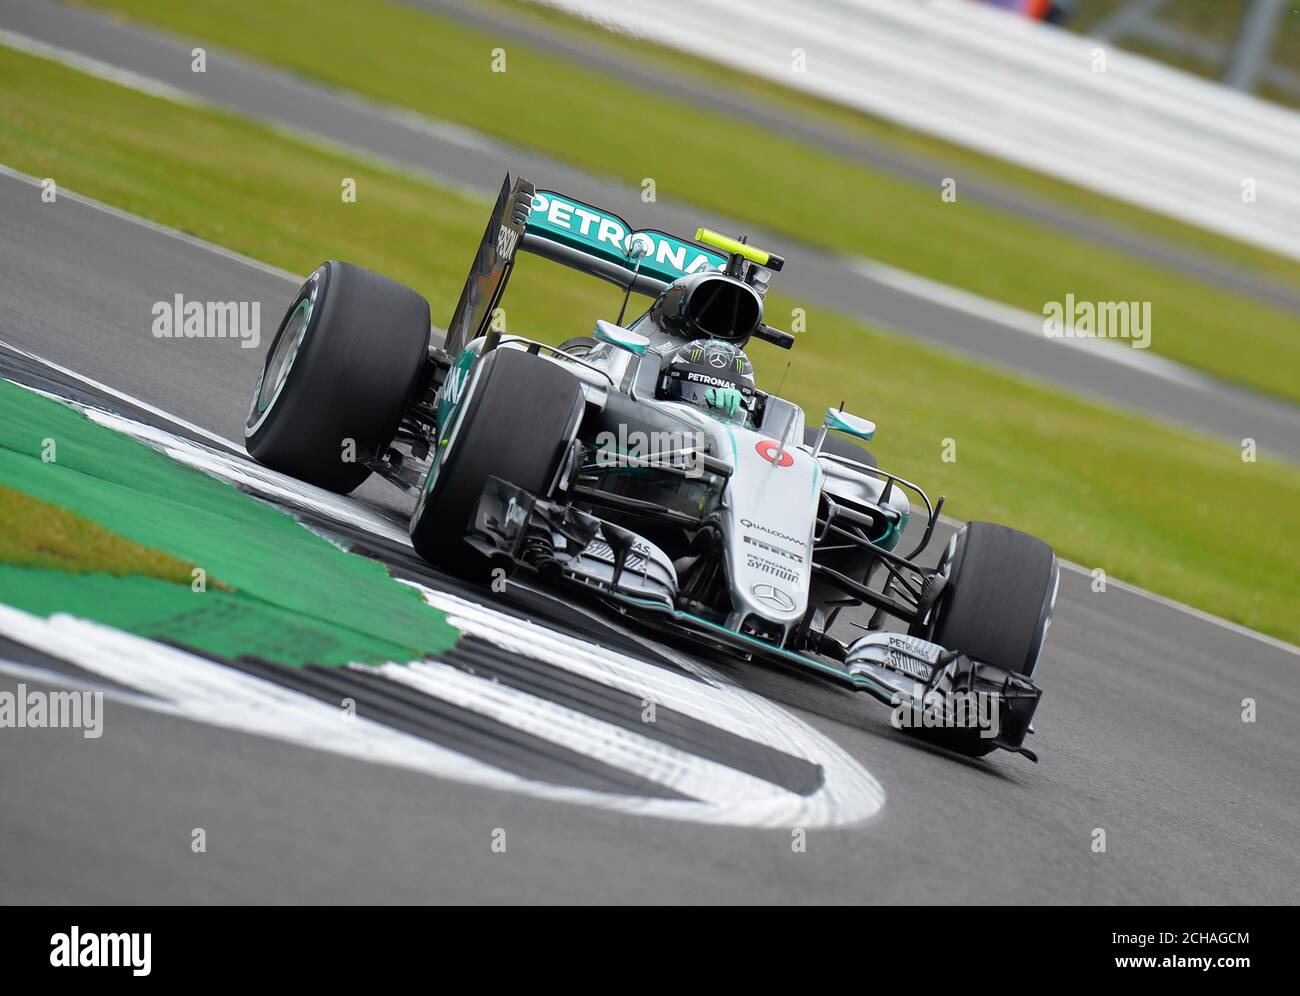 Mercedes' Nico Rosberg during Practice Day for the 2016 British Grand Prix at Silverstone Circuit, Towcester. Stock Photo